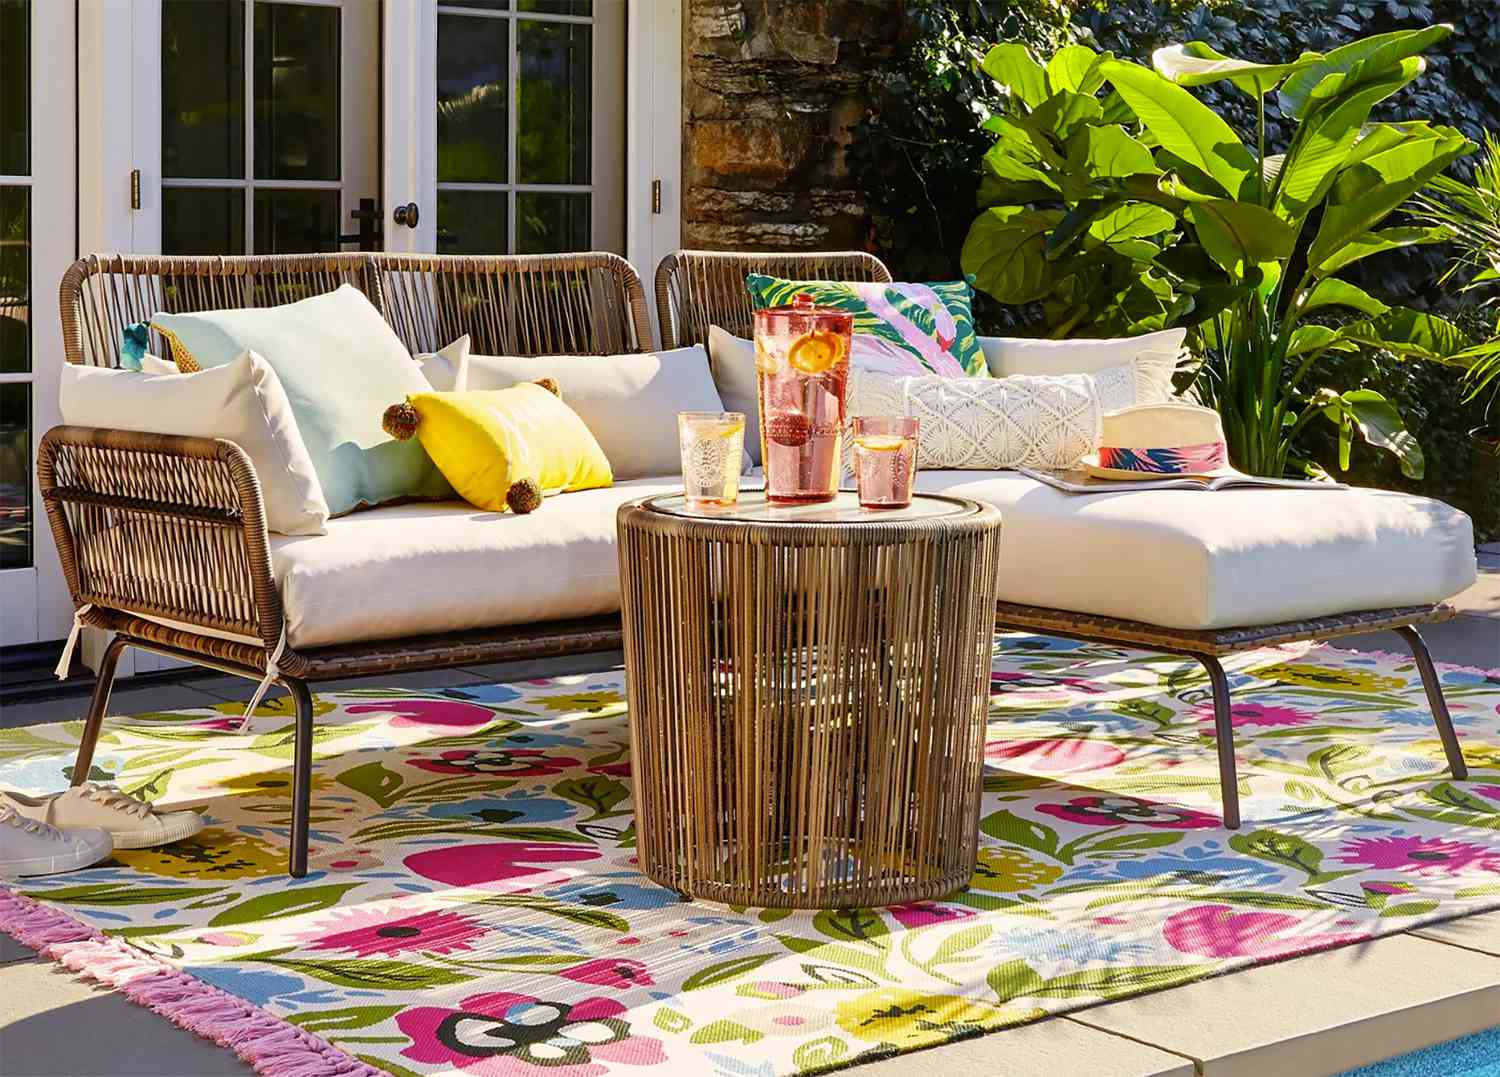 Outdoor Patio Furniture Sets At Target, Best Outdoor Furniture Sets